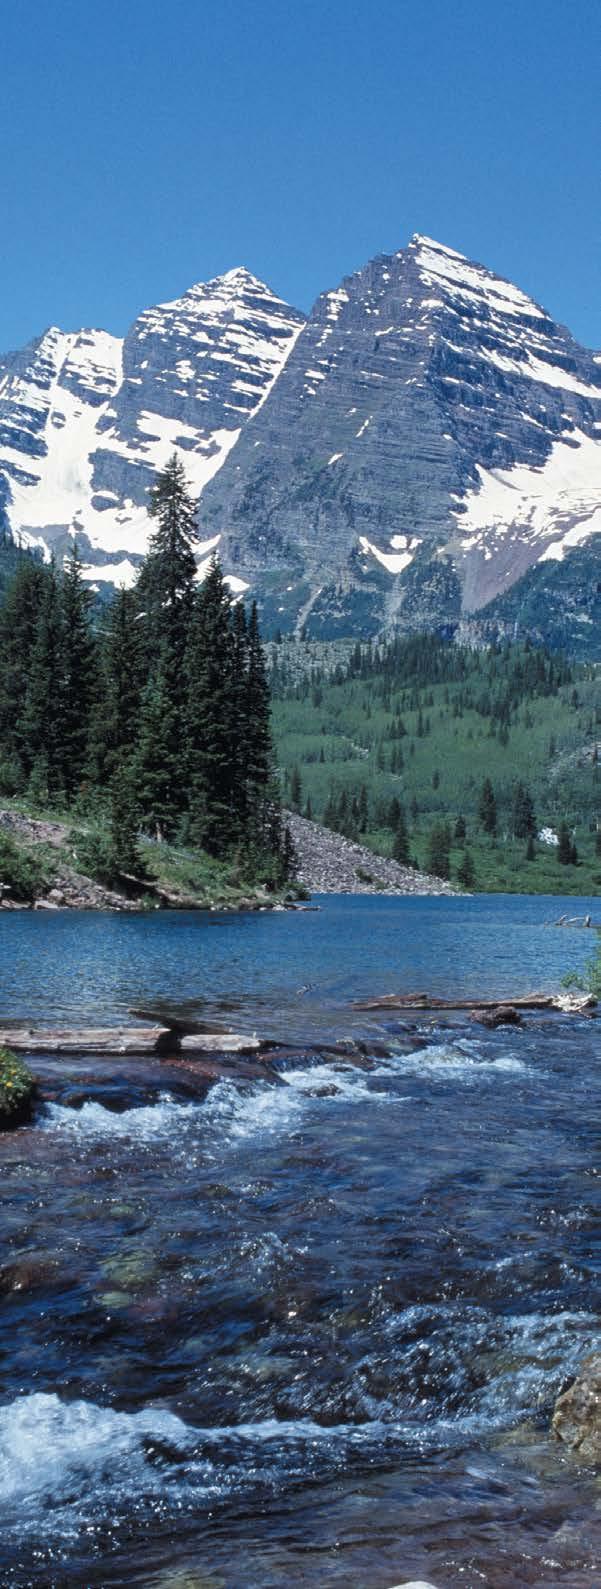 A great American icon: The twin peaks, Maroon Bells & Maroon Lake in White River National Forest, Colorado Safe Outlook Say hello to Safe Outlook, a fixed-indexed annuity from Great American Life